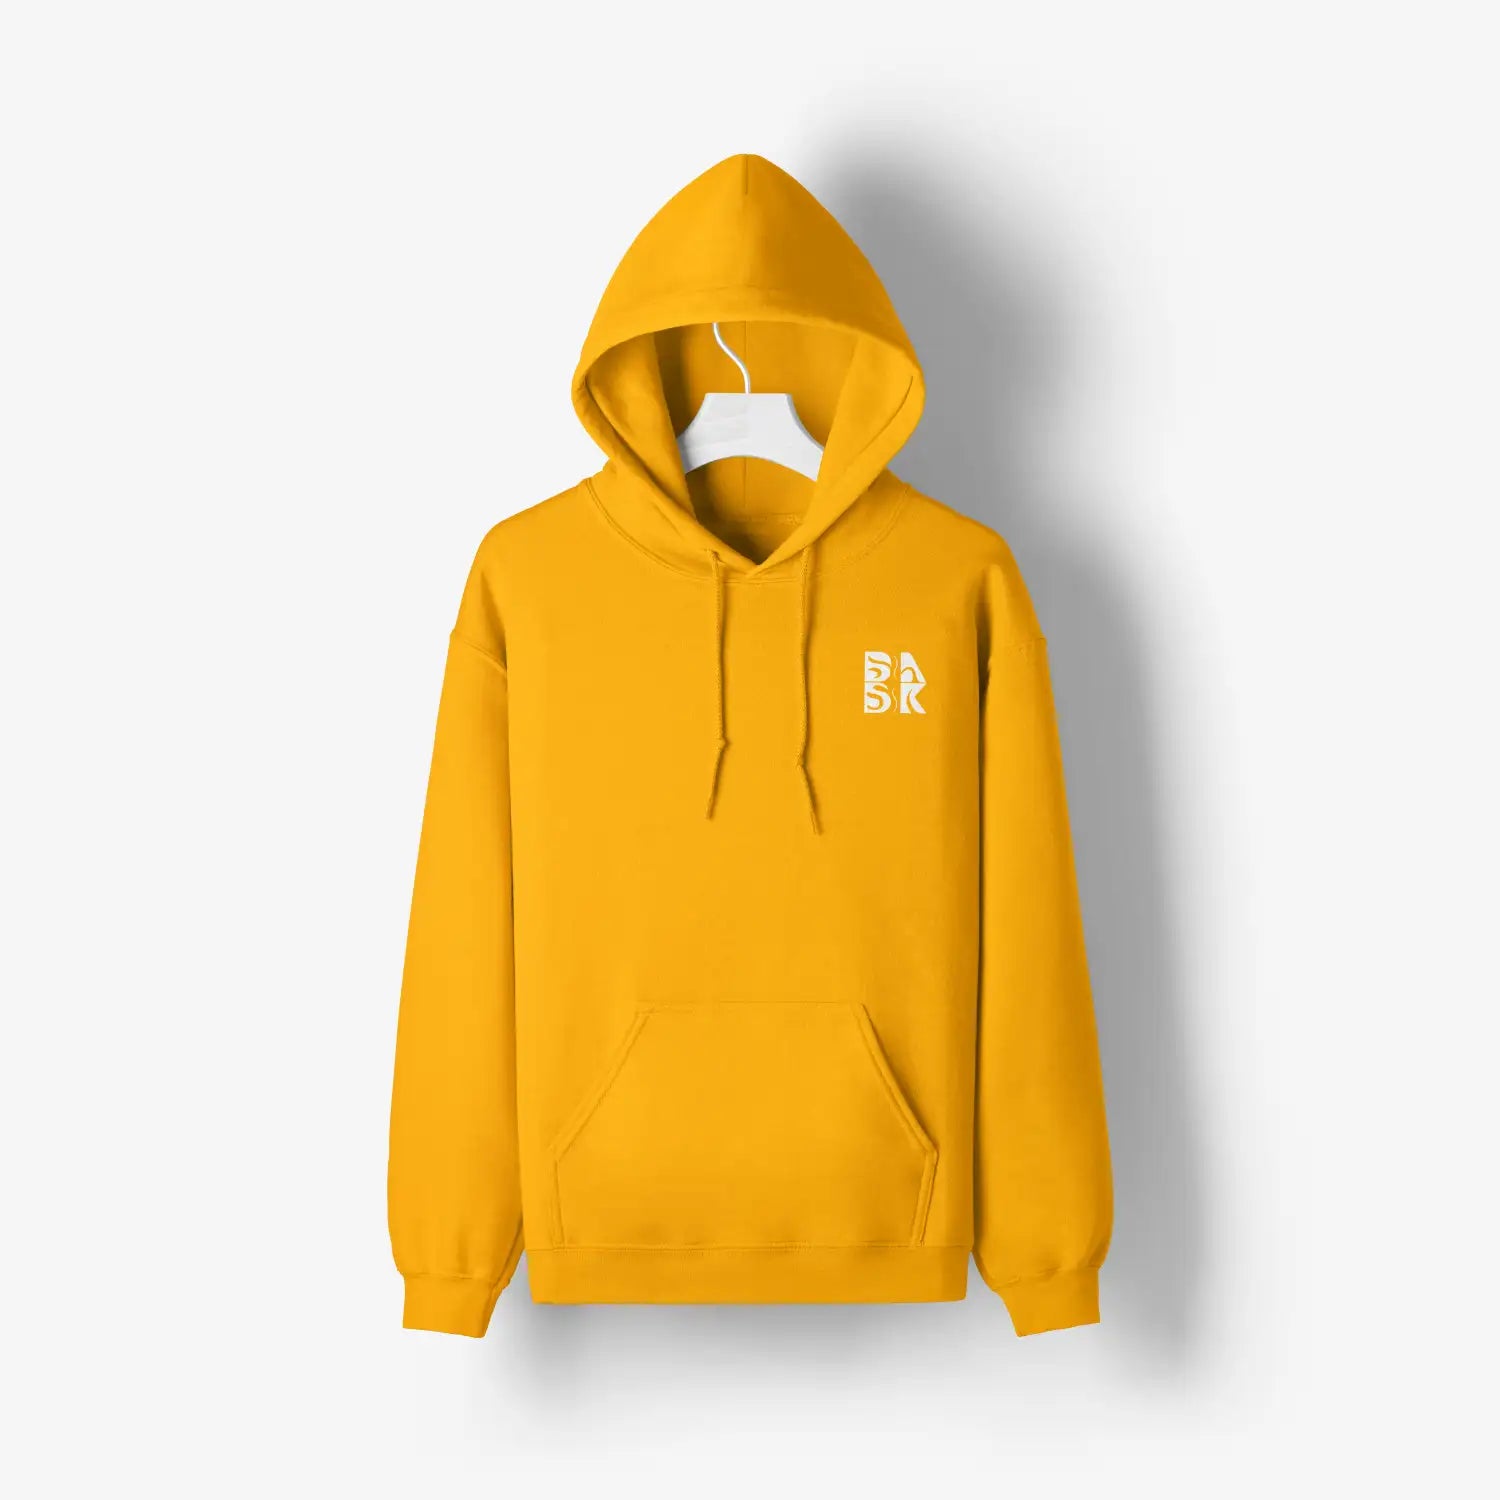 A Be Still and Know Sunkissed & Saved Hoodie with a white logo saved on it.